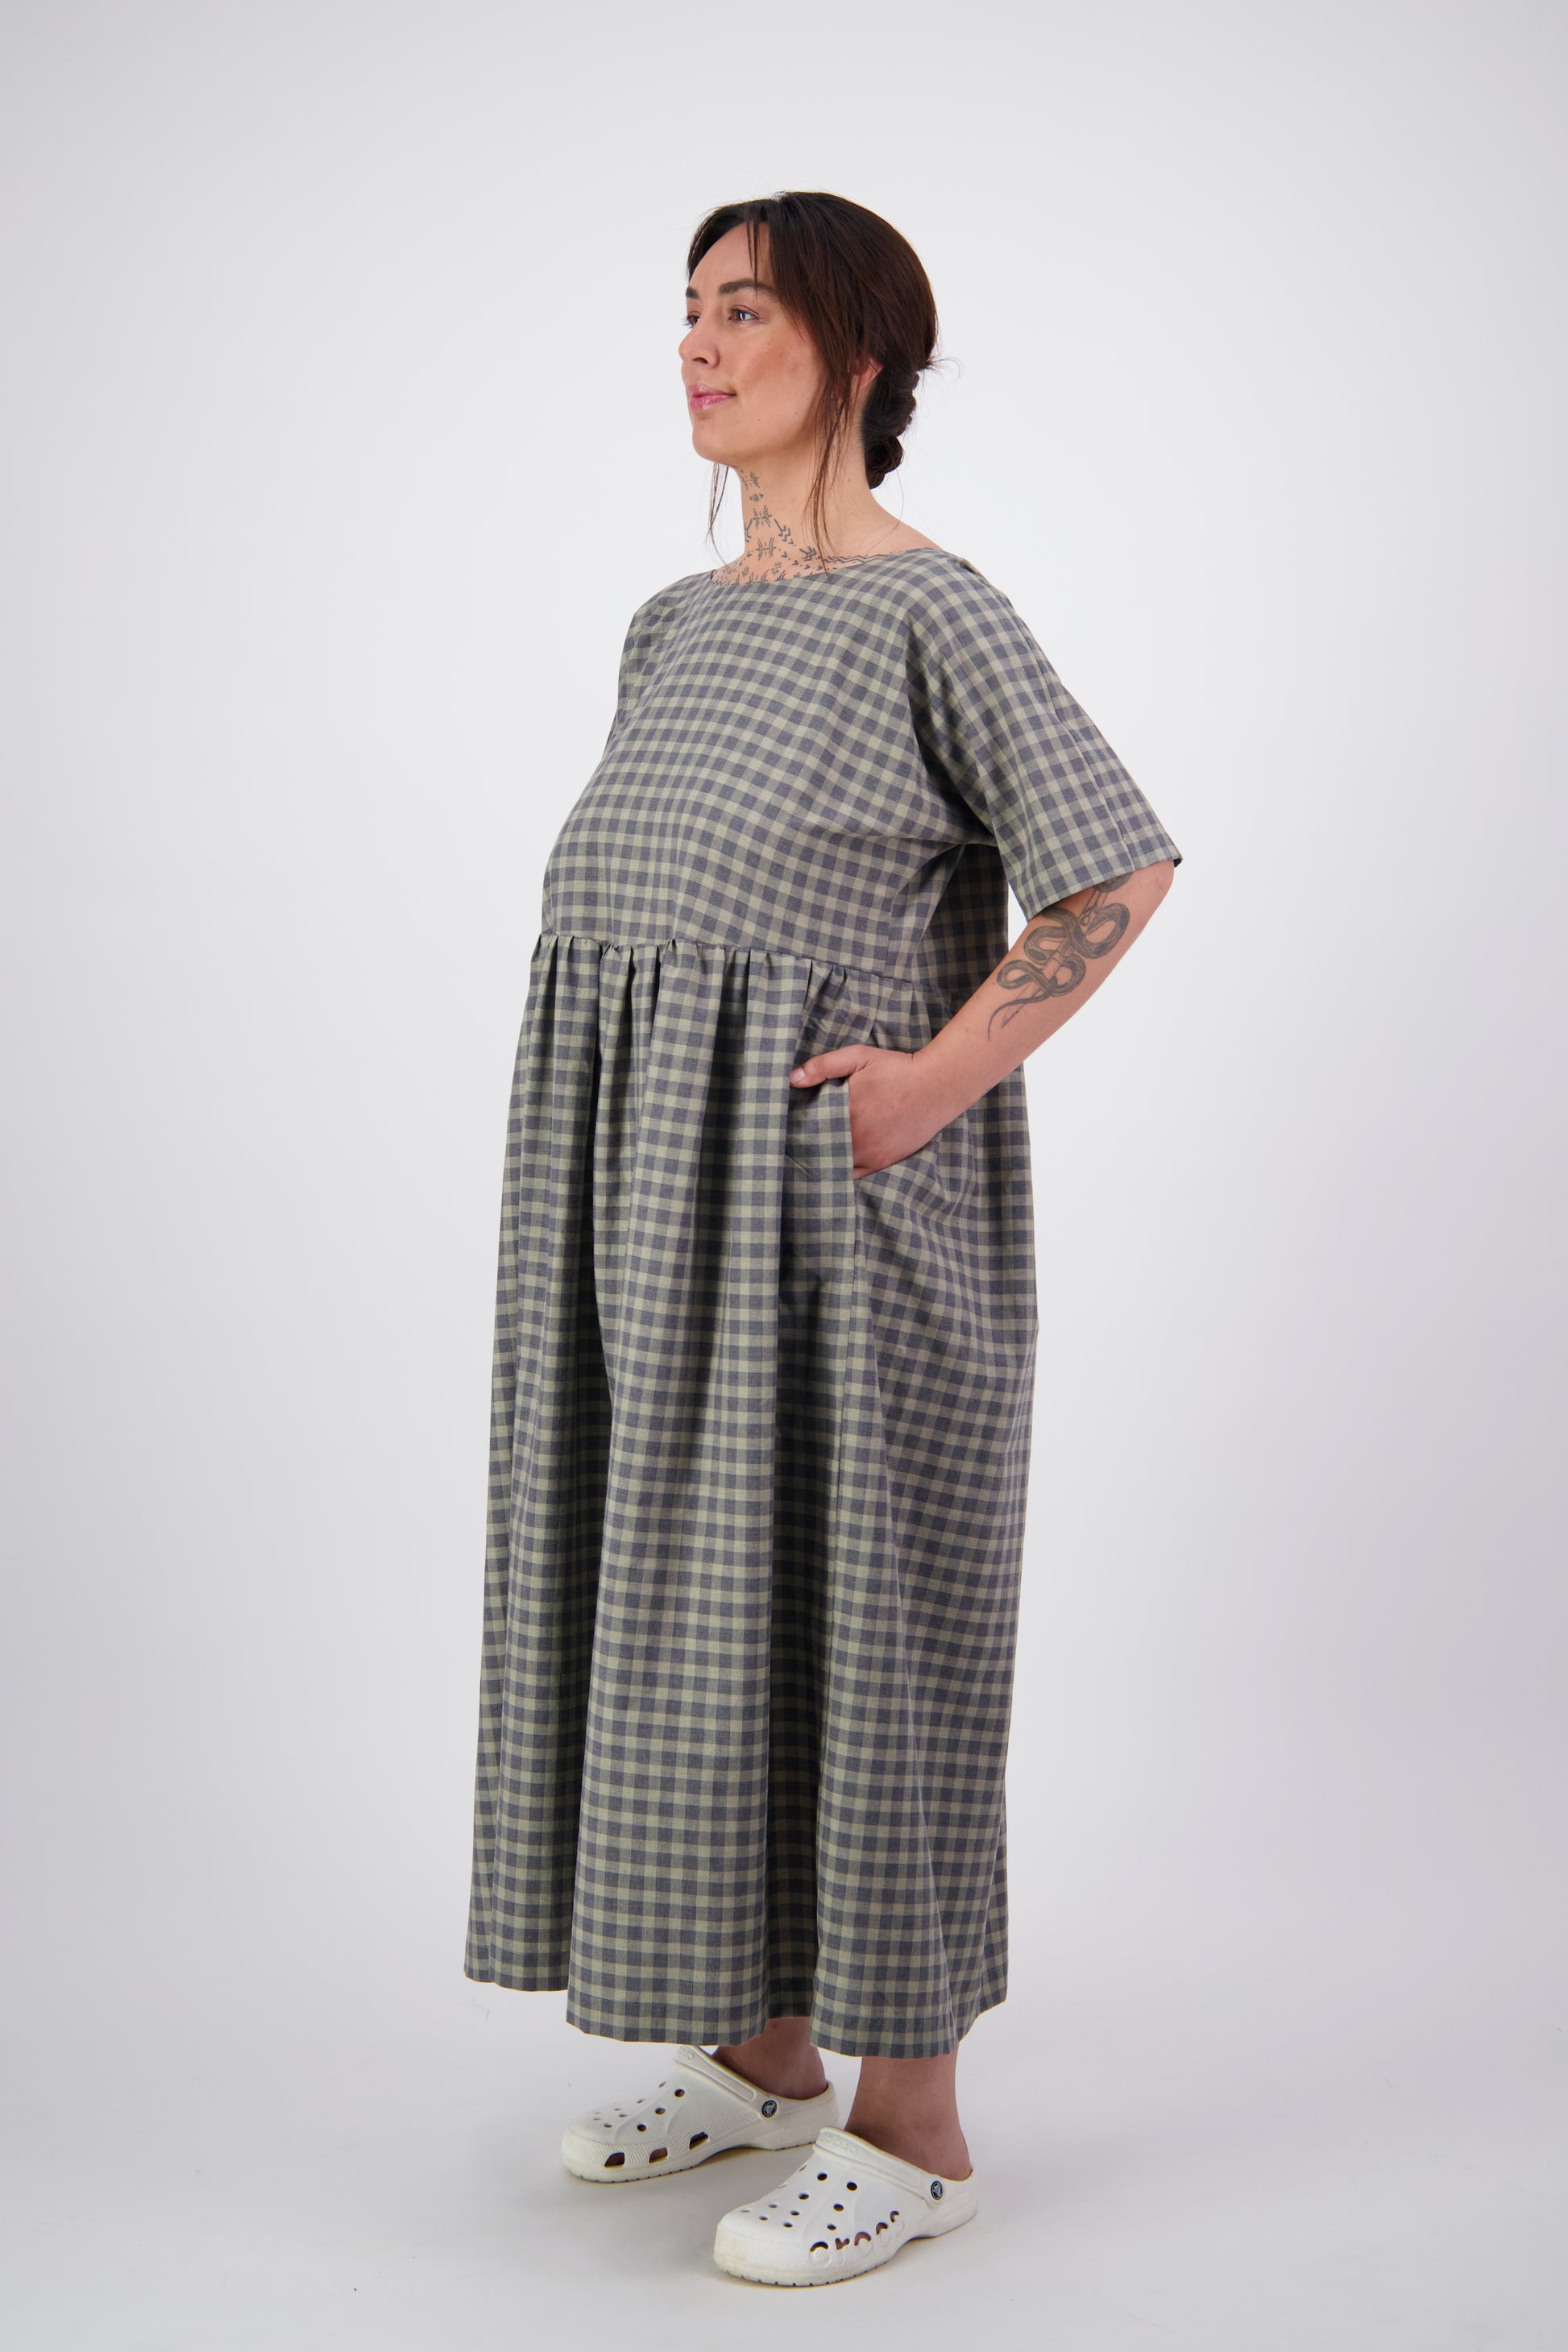 Arlena wearing grey tone check reversible dress with short sleeves and gathered waist showing pockets